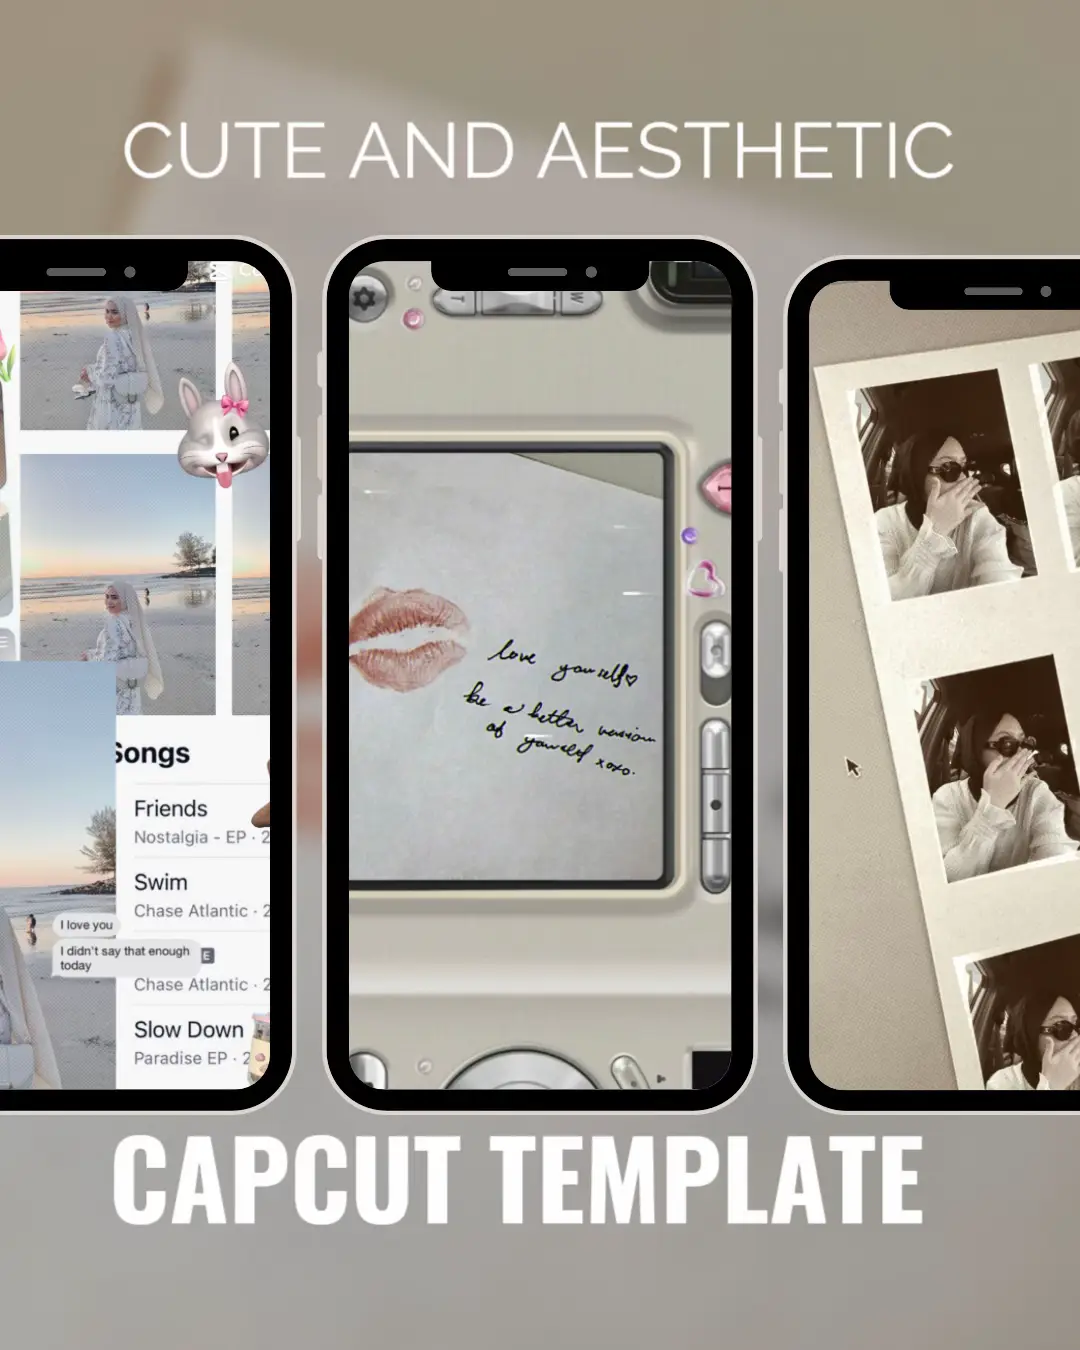 How to Use CapCut Templates to Spice Up Your Videos?